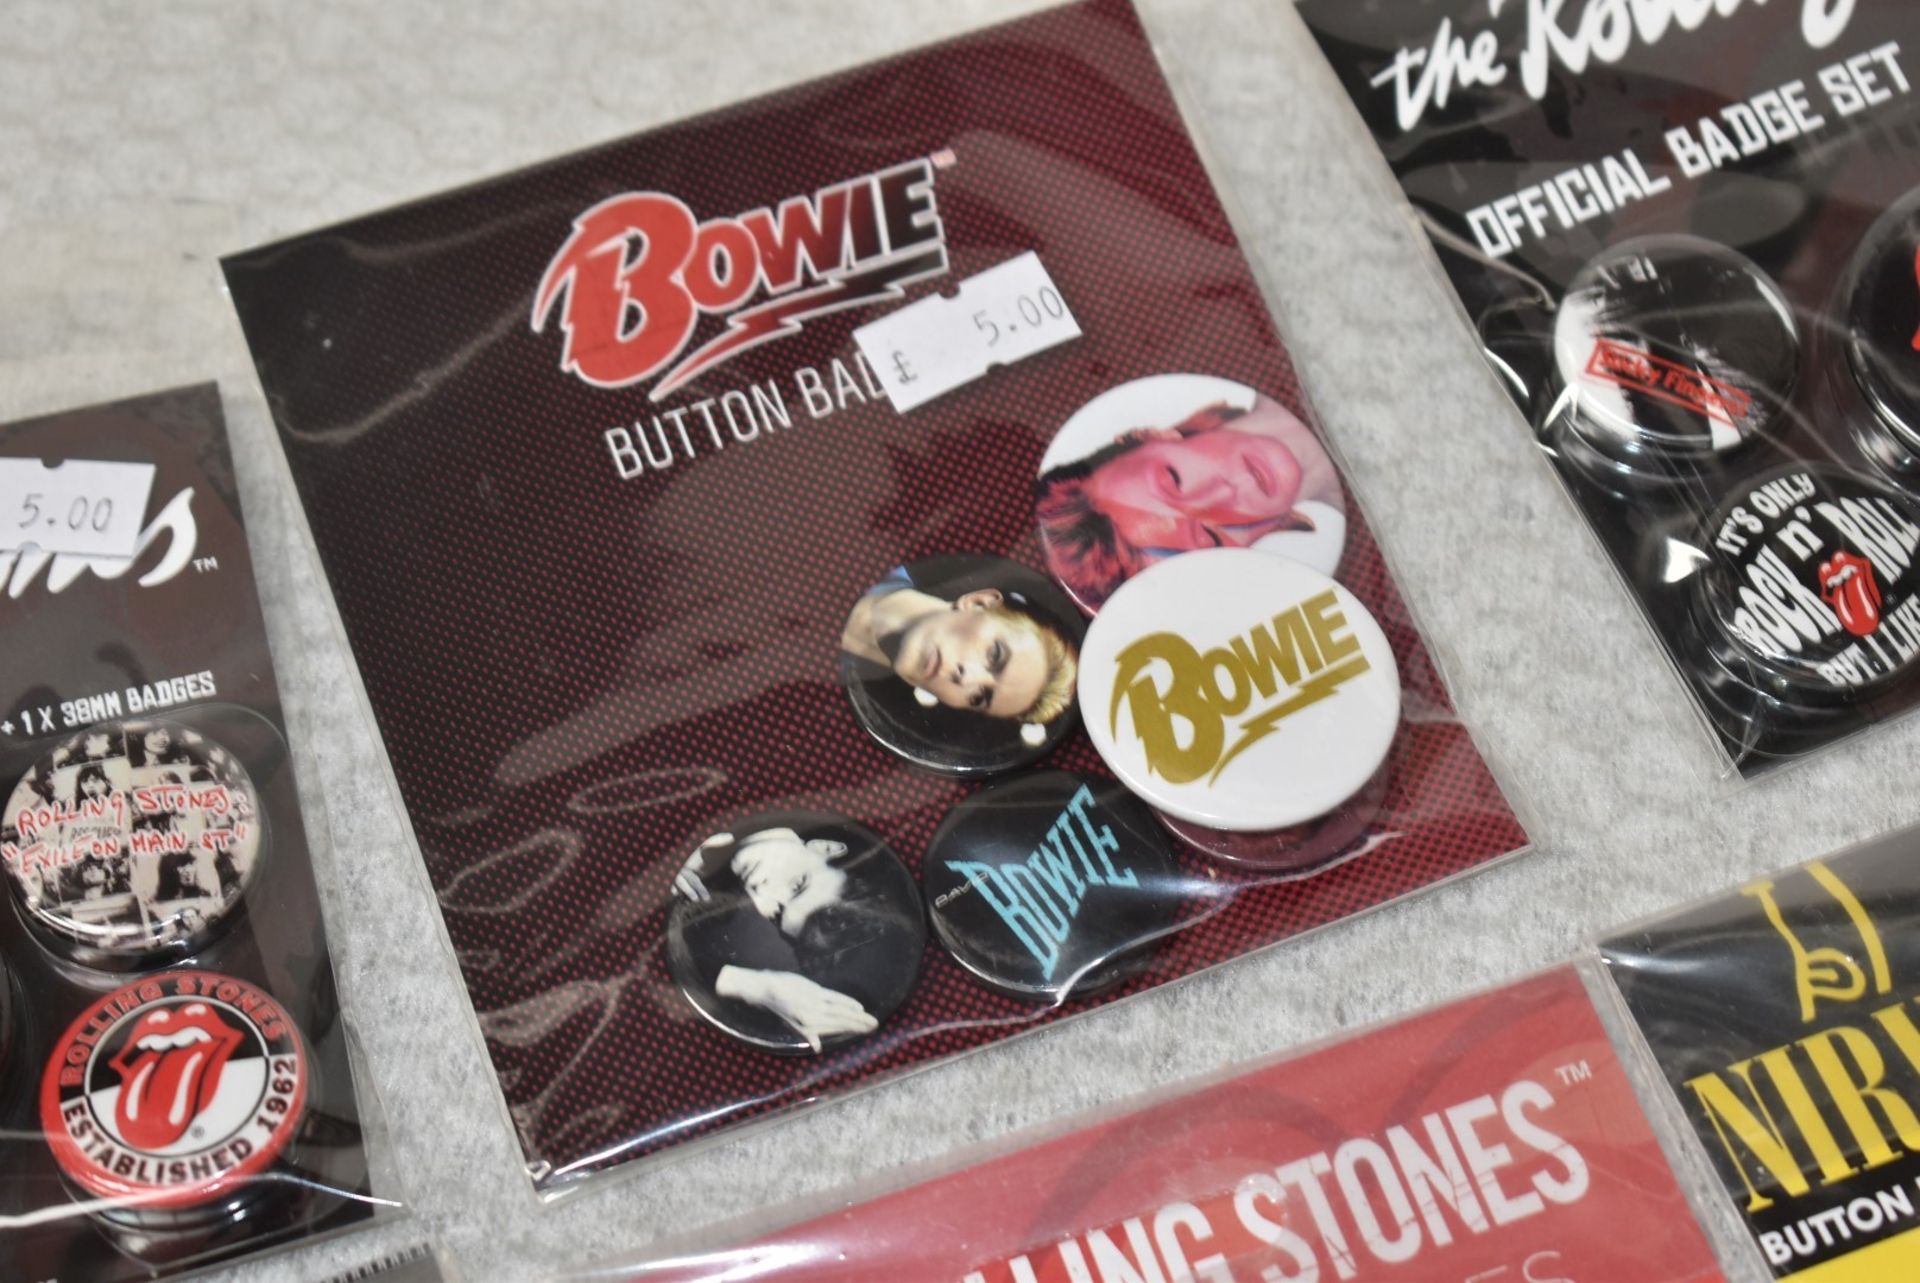 Approx 70 x Various Button Badge Multipack Sets - Rolling Stones, Nirvana, Guns n Roses, David - Image 4 of 9